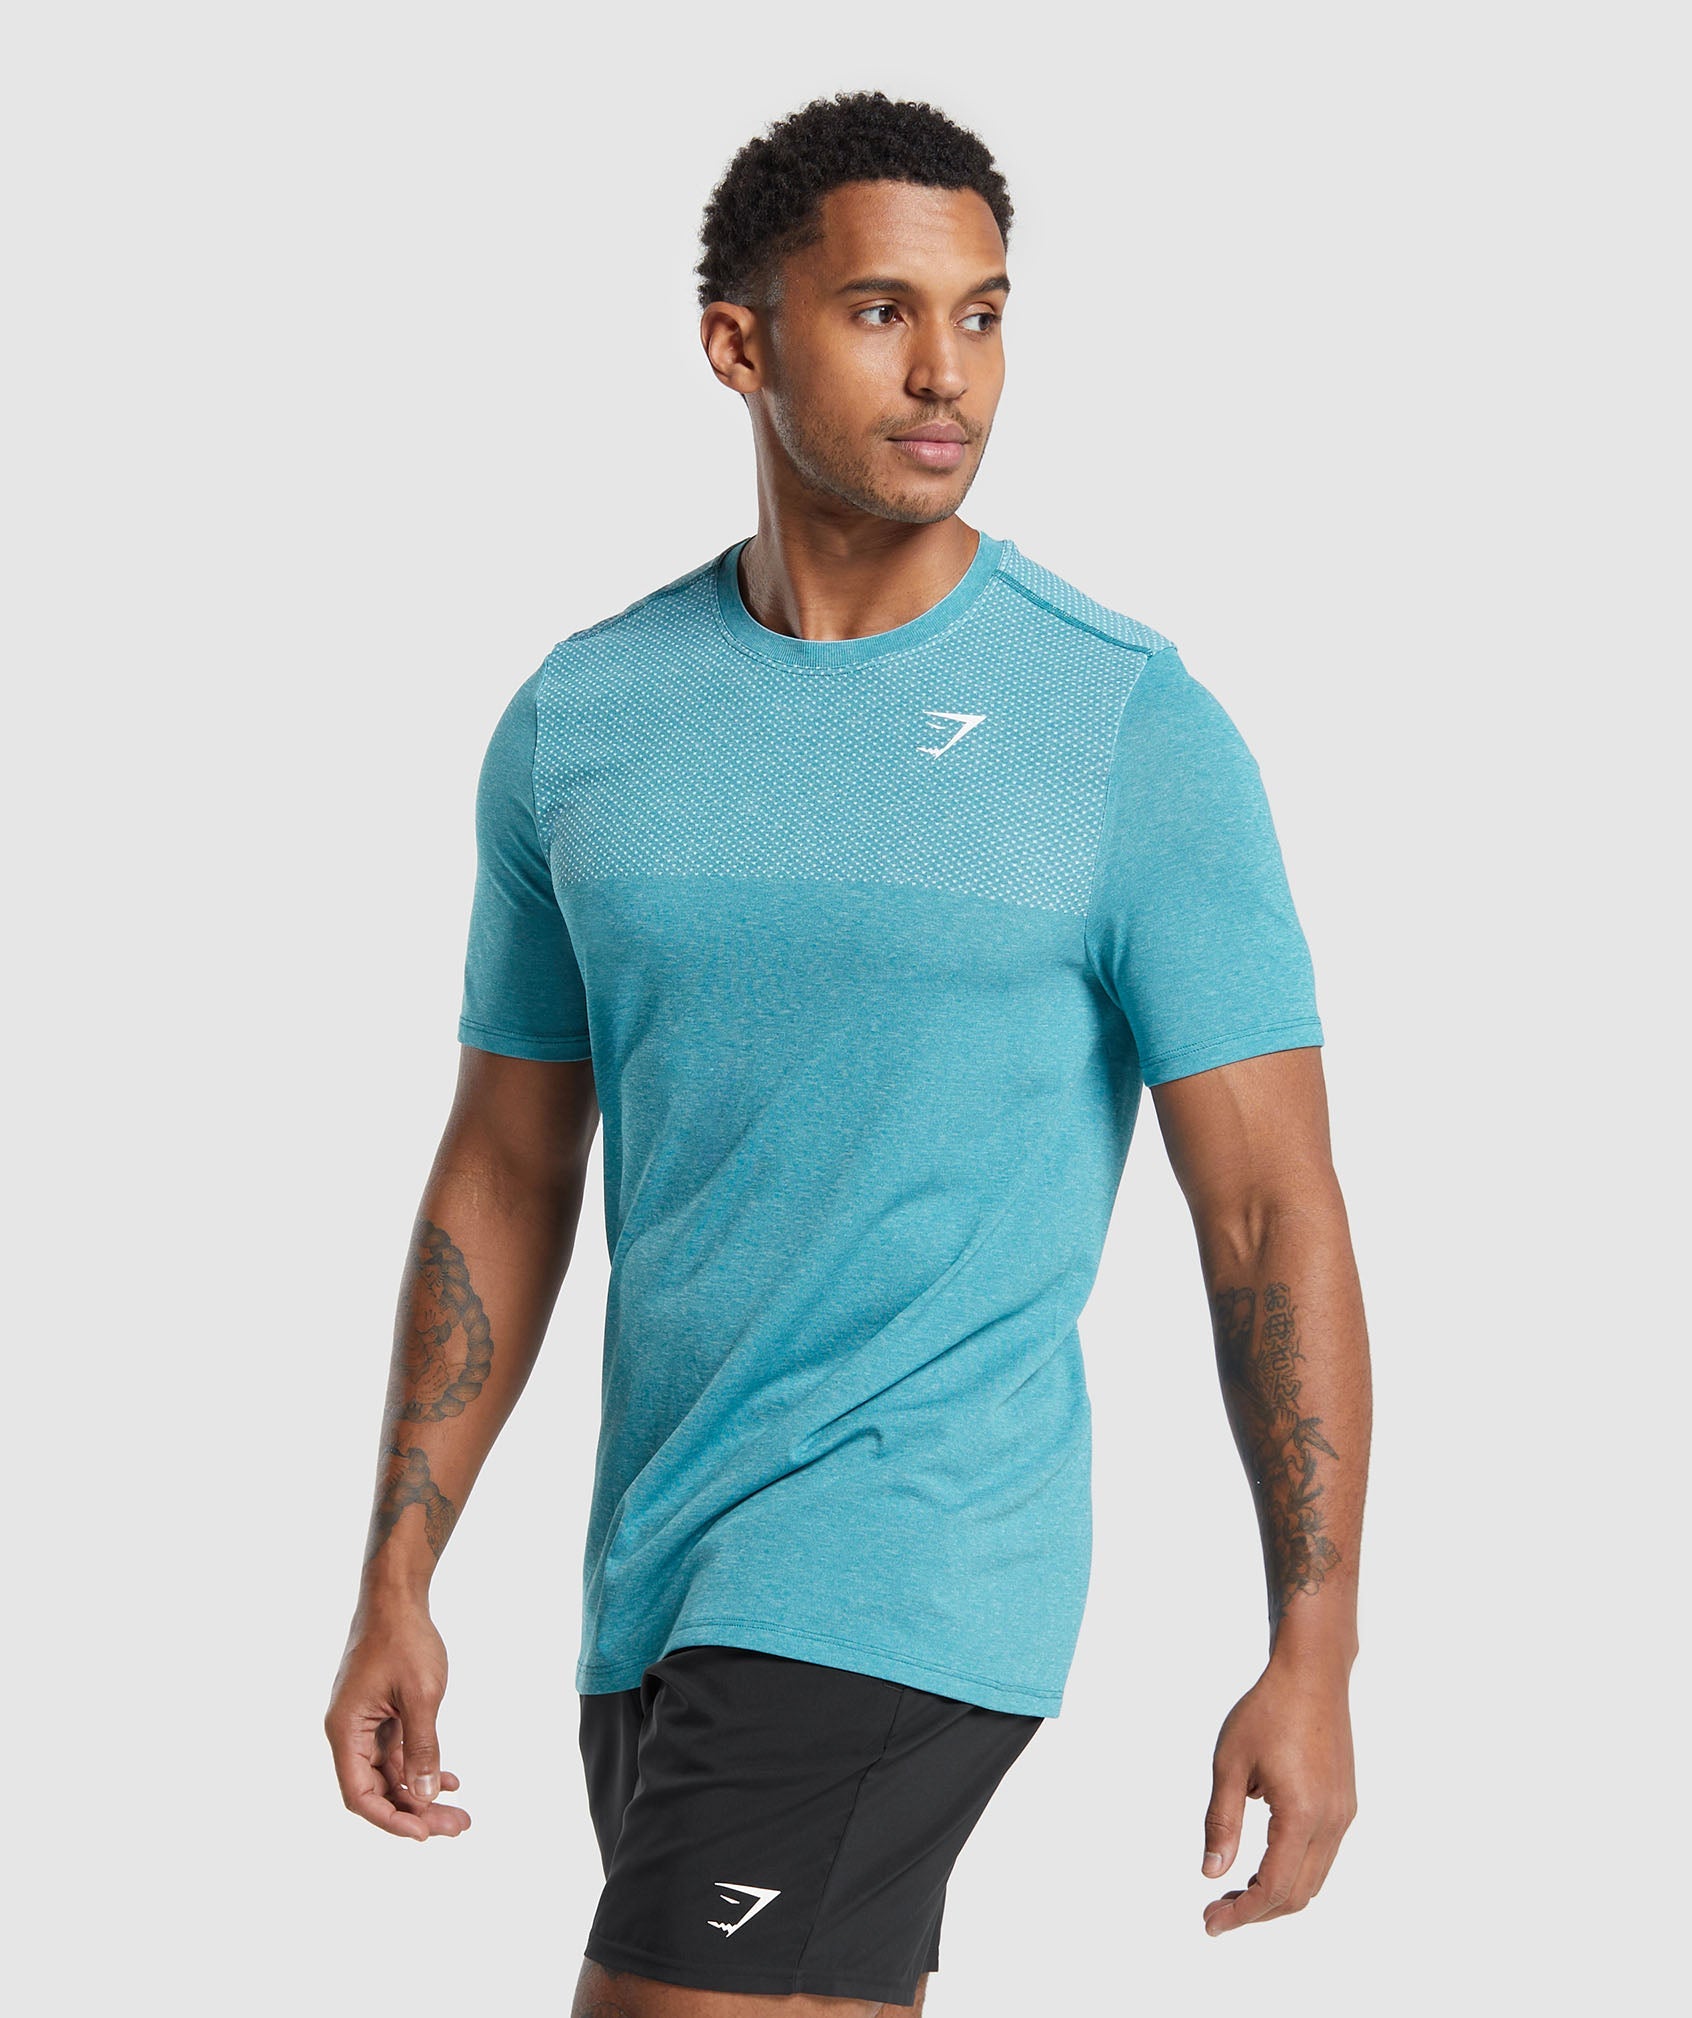 Vital Seamless T-Shirt in Artificial Teal/White Marl - view 3